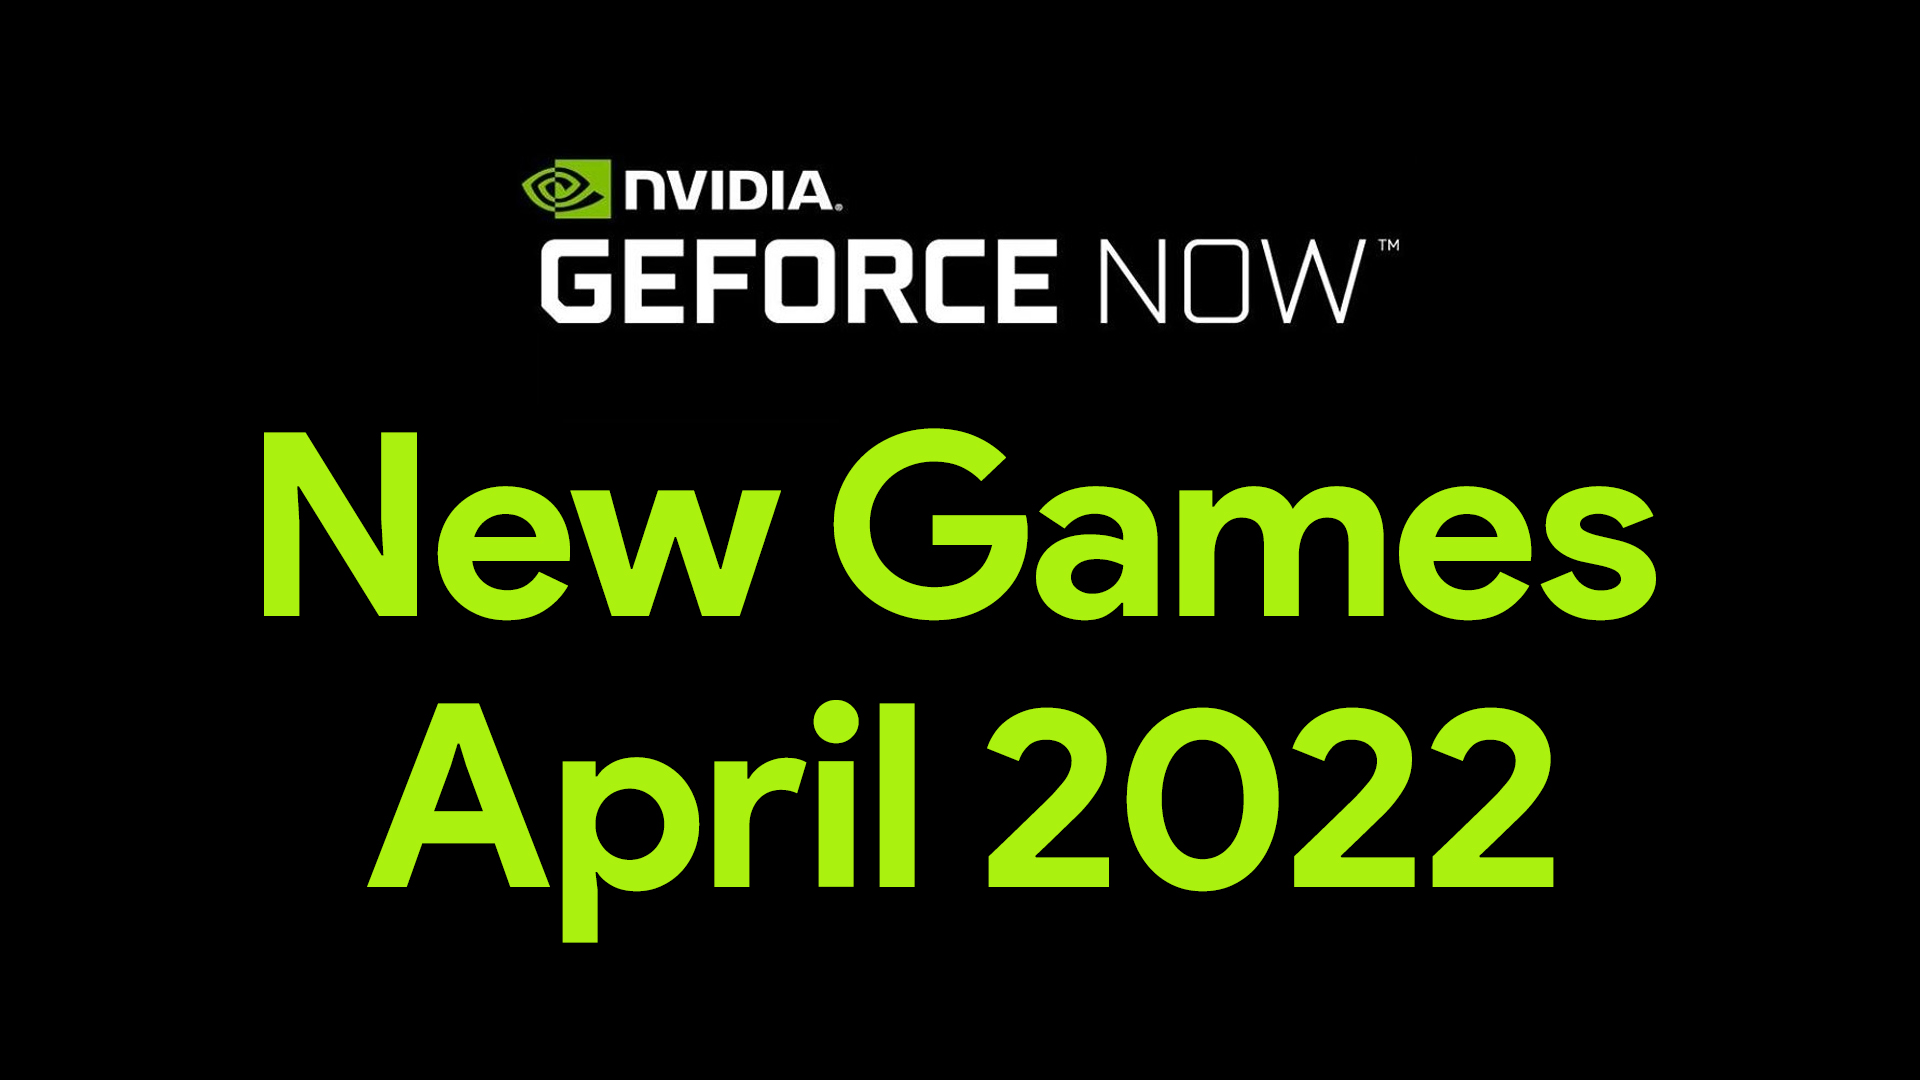 New games are coming to GeForce NOW this month!